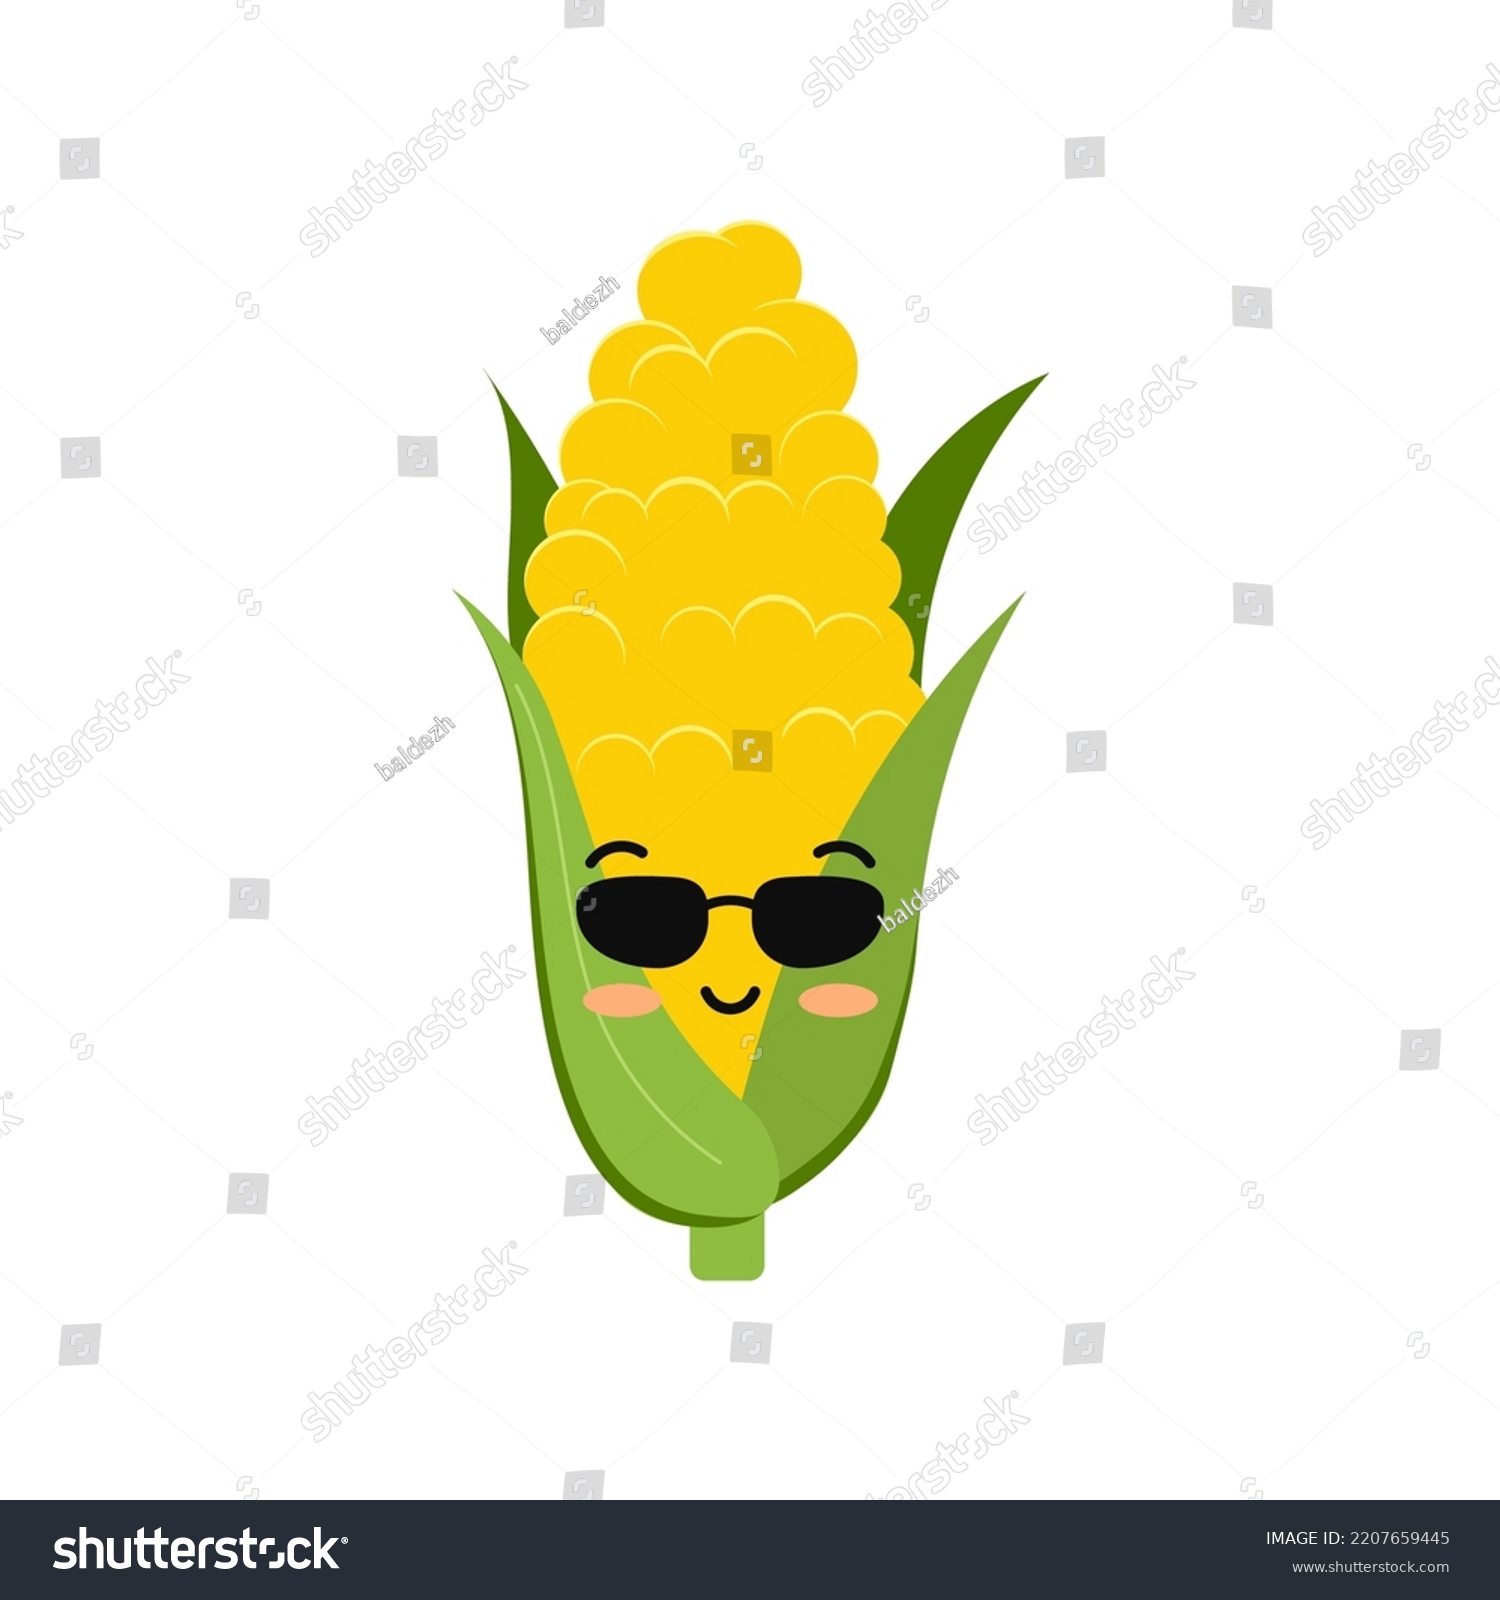 Cute corn cob wearing sunglasses funny cool cartoon baby snack character vector icon. Flat design kawaii maize emoji with face illustration isolated on white background. Sweetcorn kids mascot. #2207659445